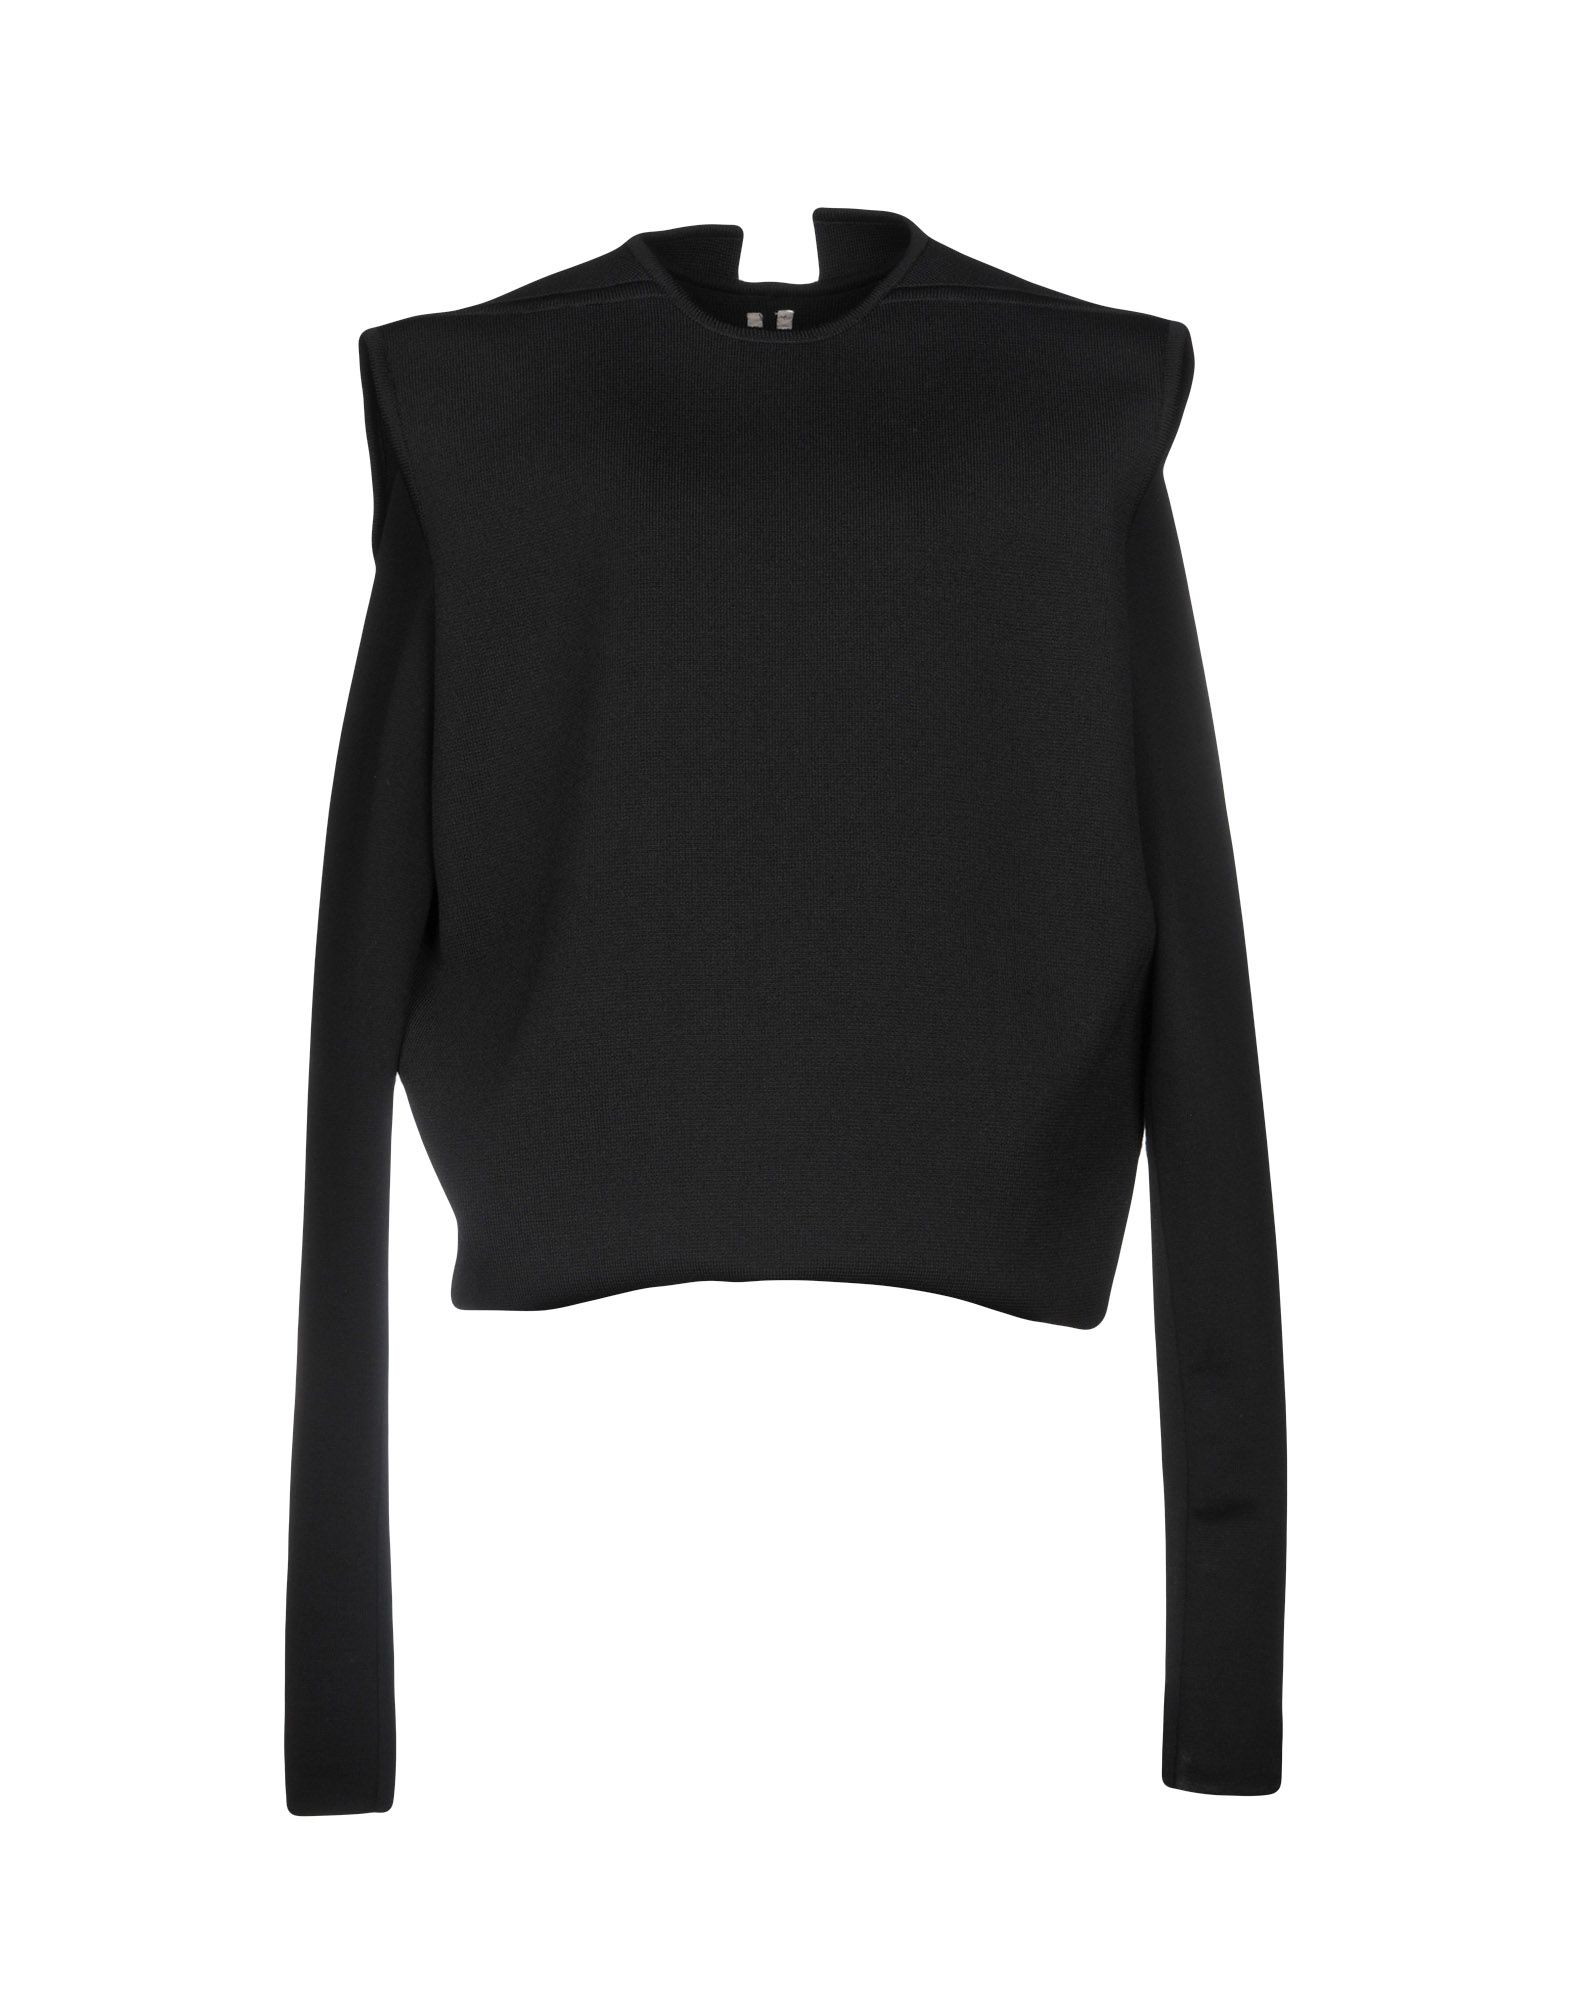 RICK OWENS jumperS,39879805RD 3